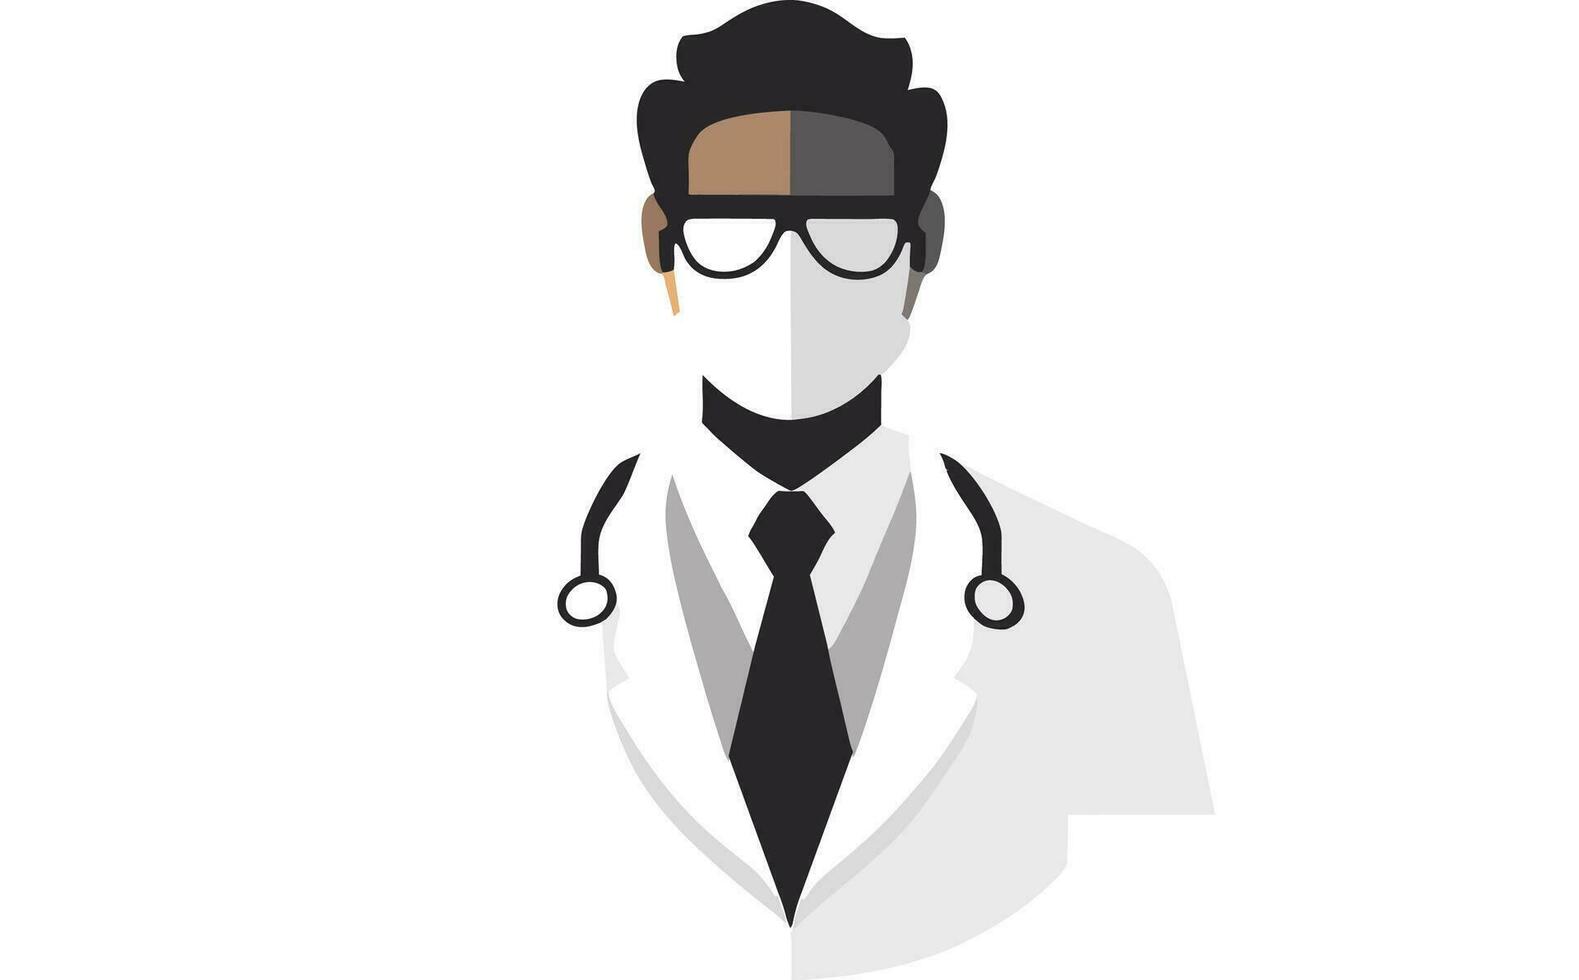 Docter silhouette vector art, Silhouette of man Doctor. 26181687